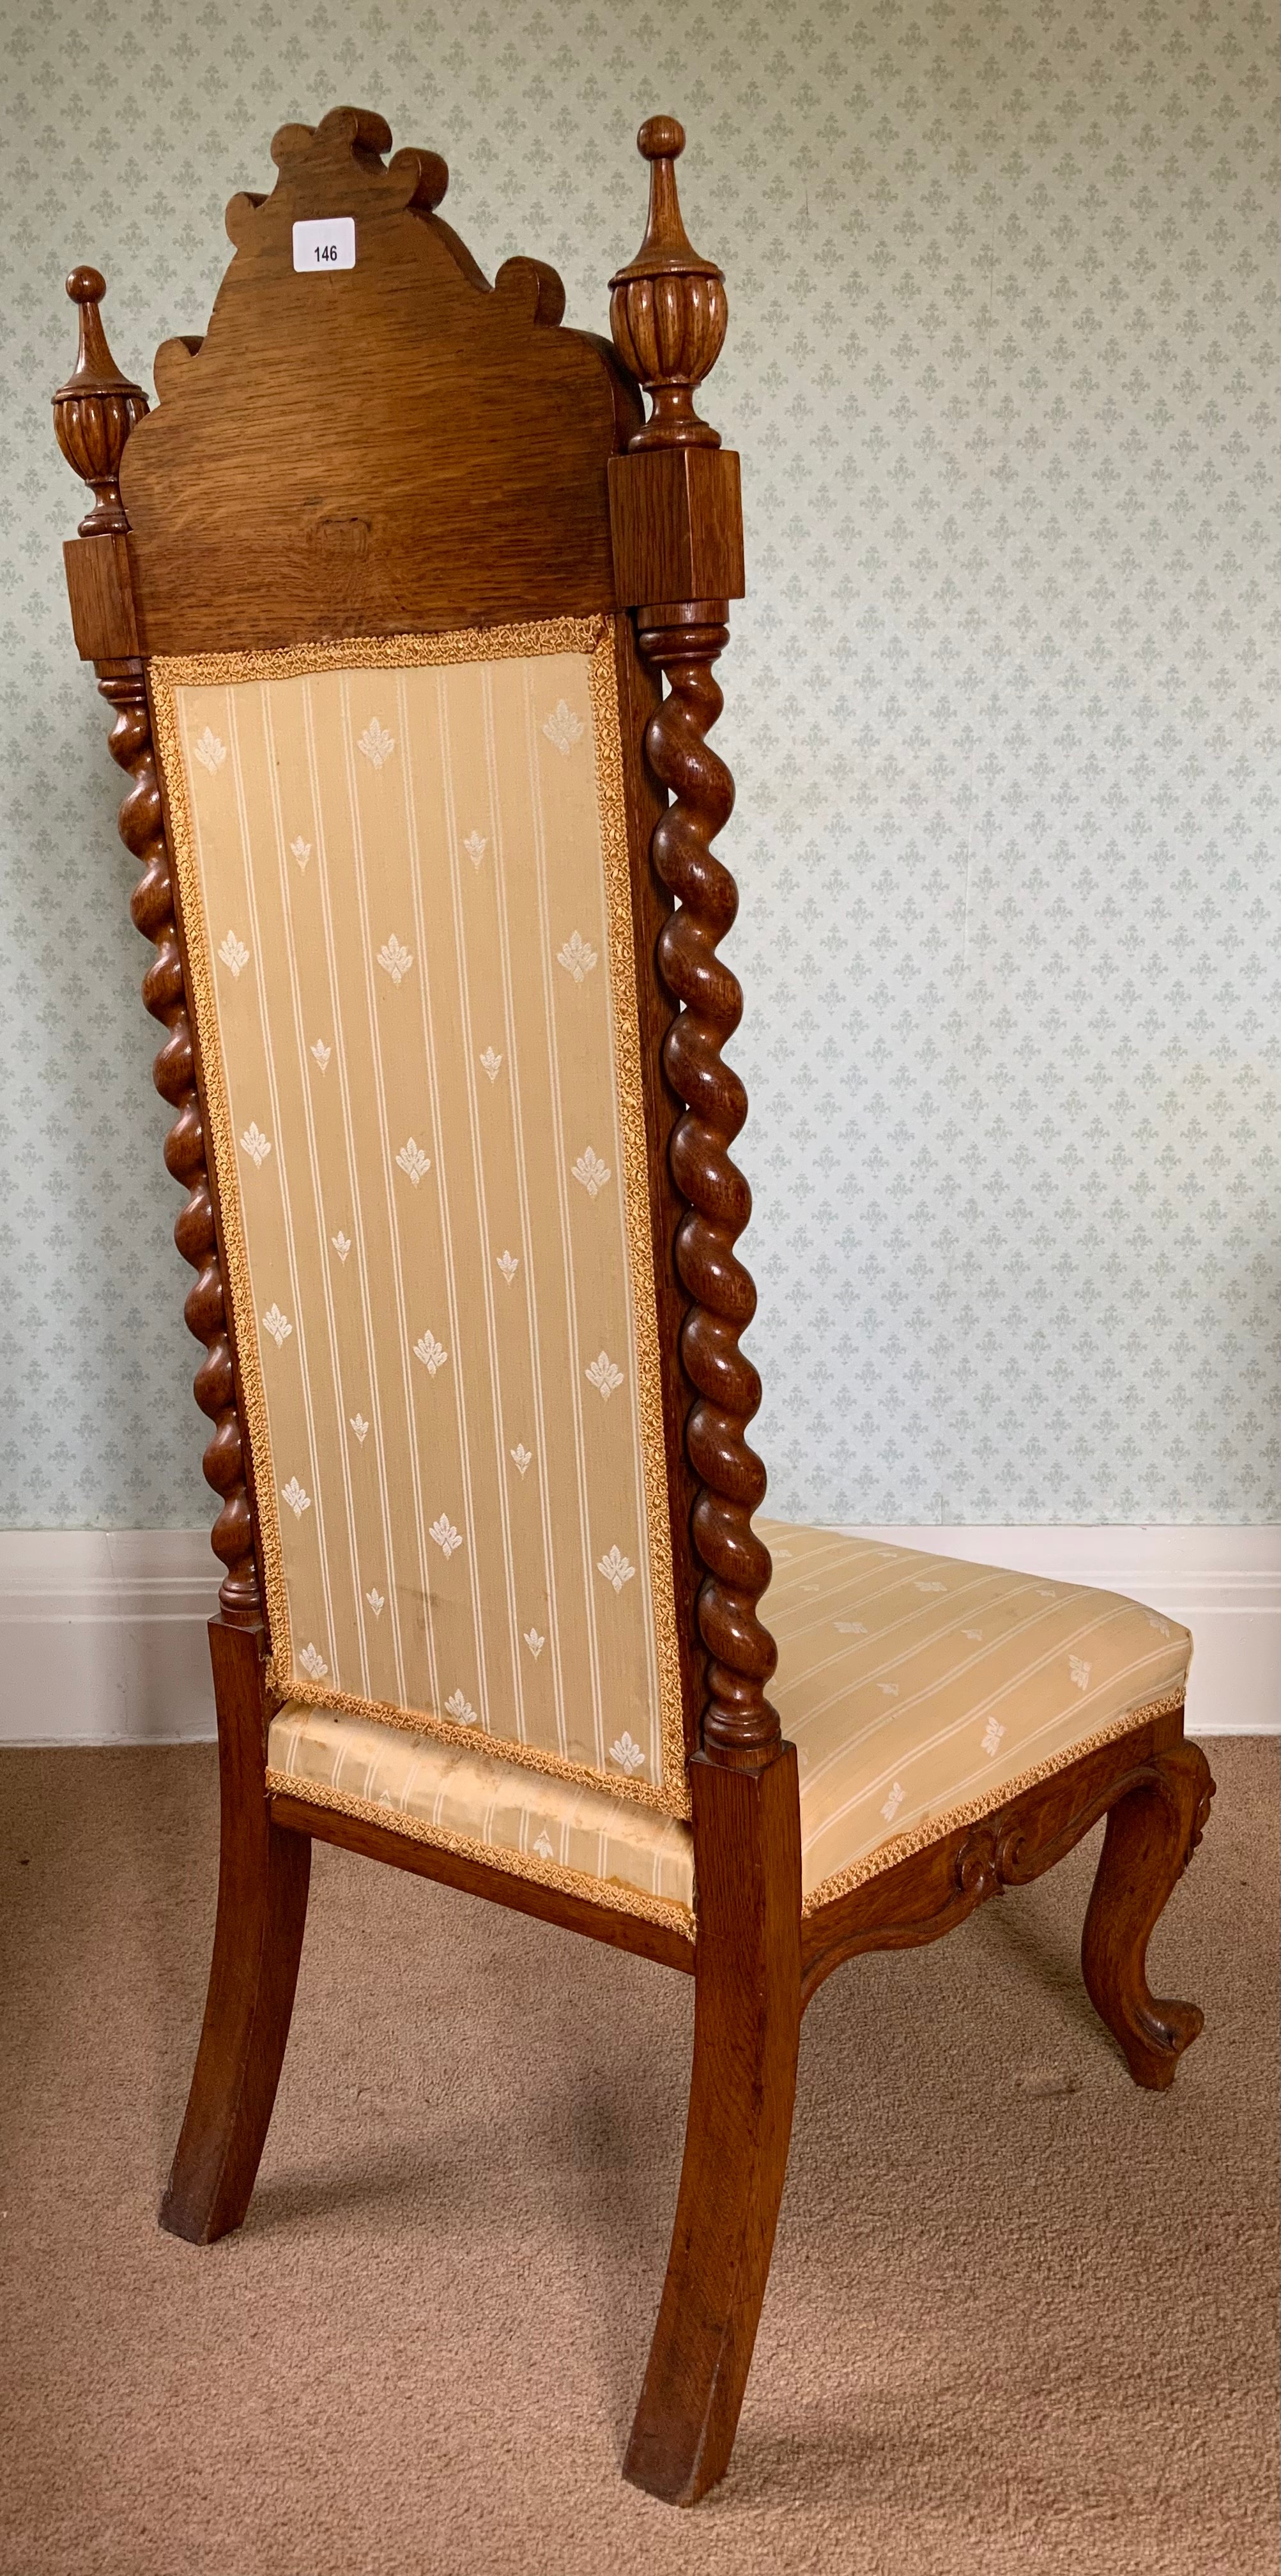 A 19th century walnut nursing chair, upholstered back and seat, turned freestanding columns, - Image 3 of 6